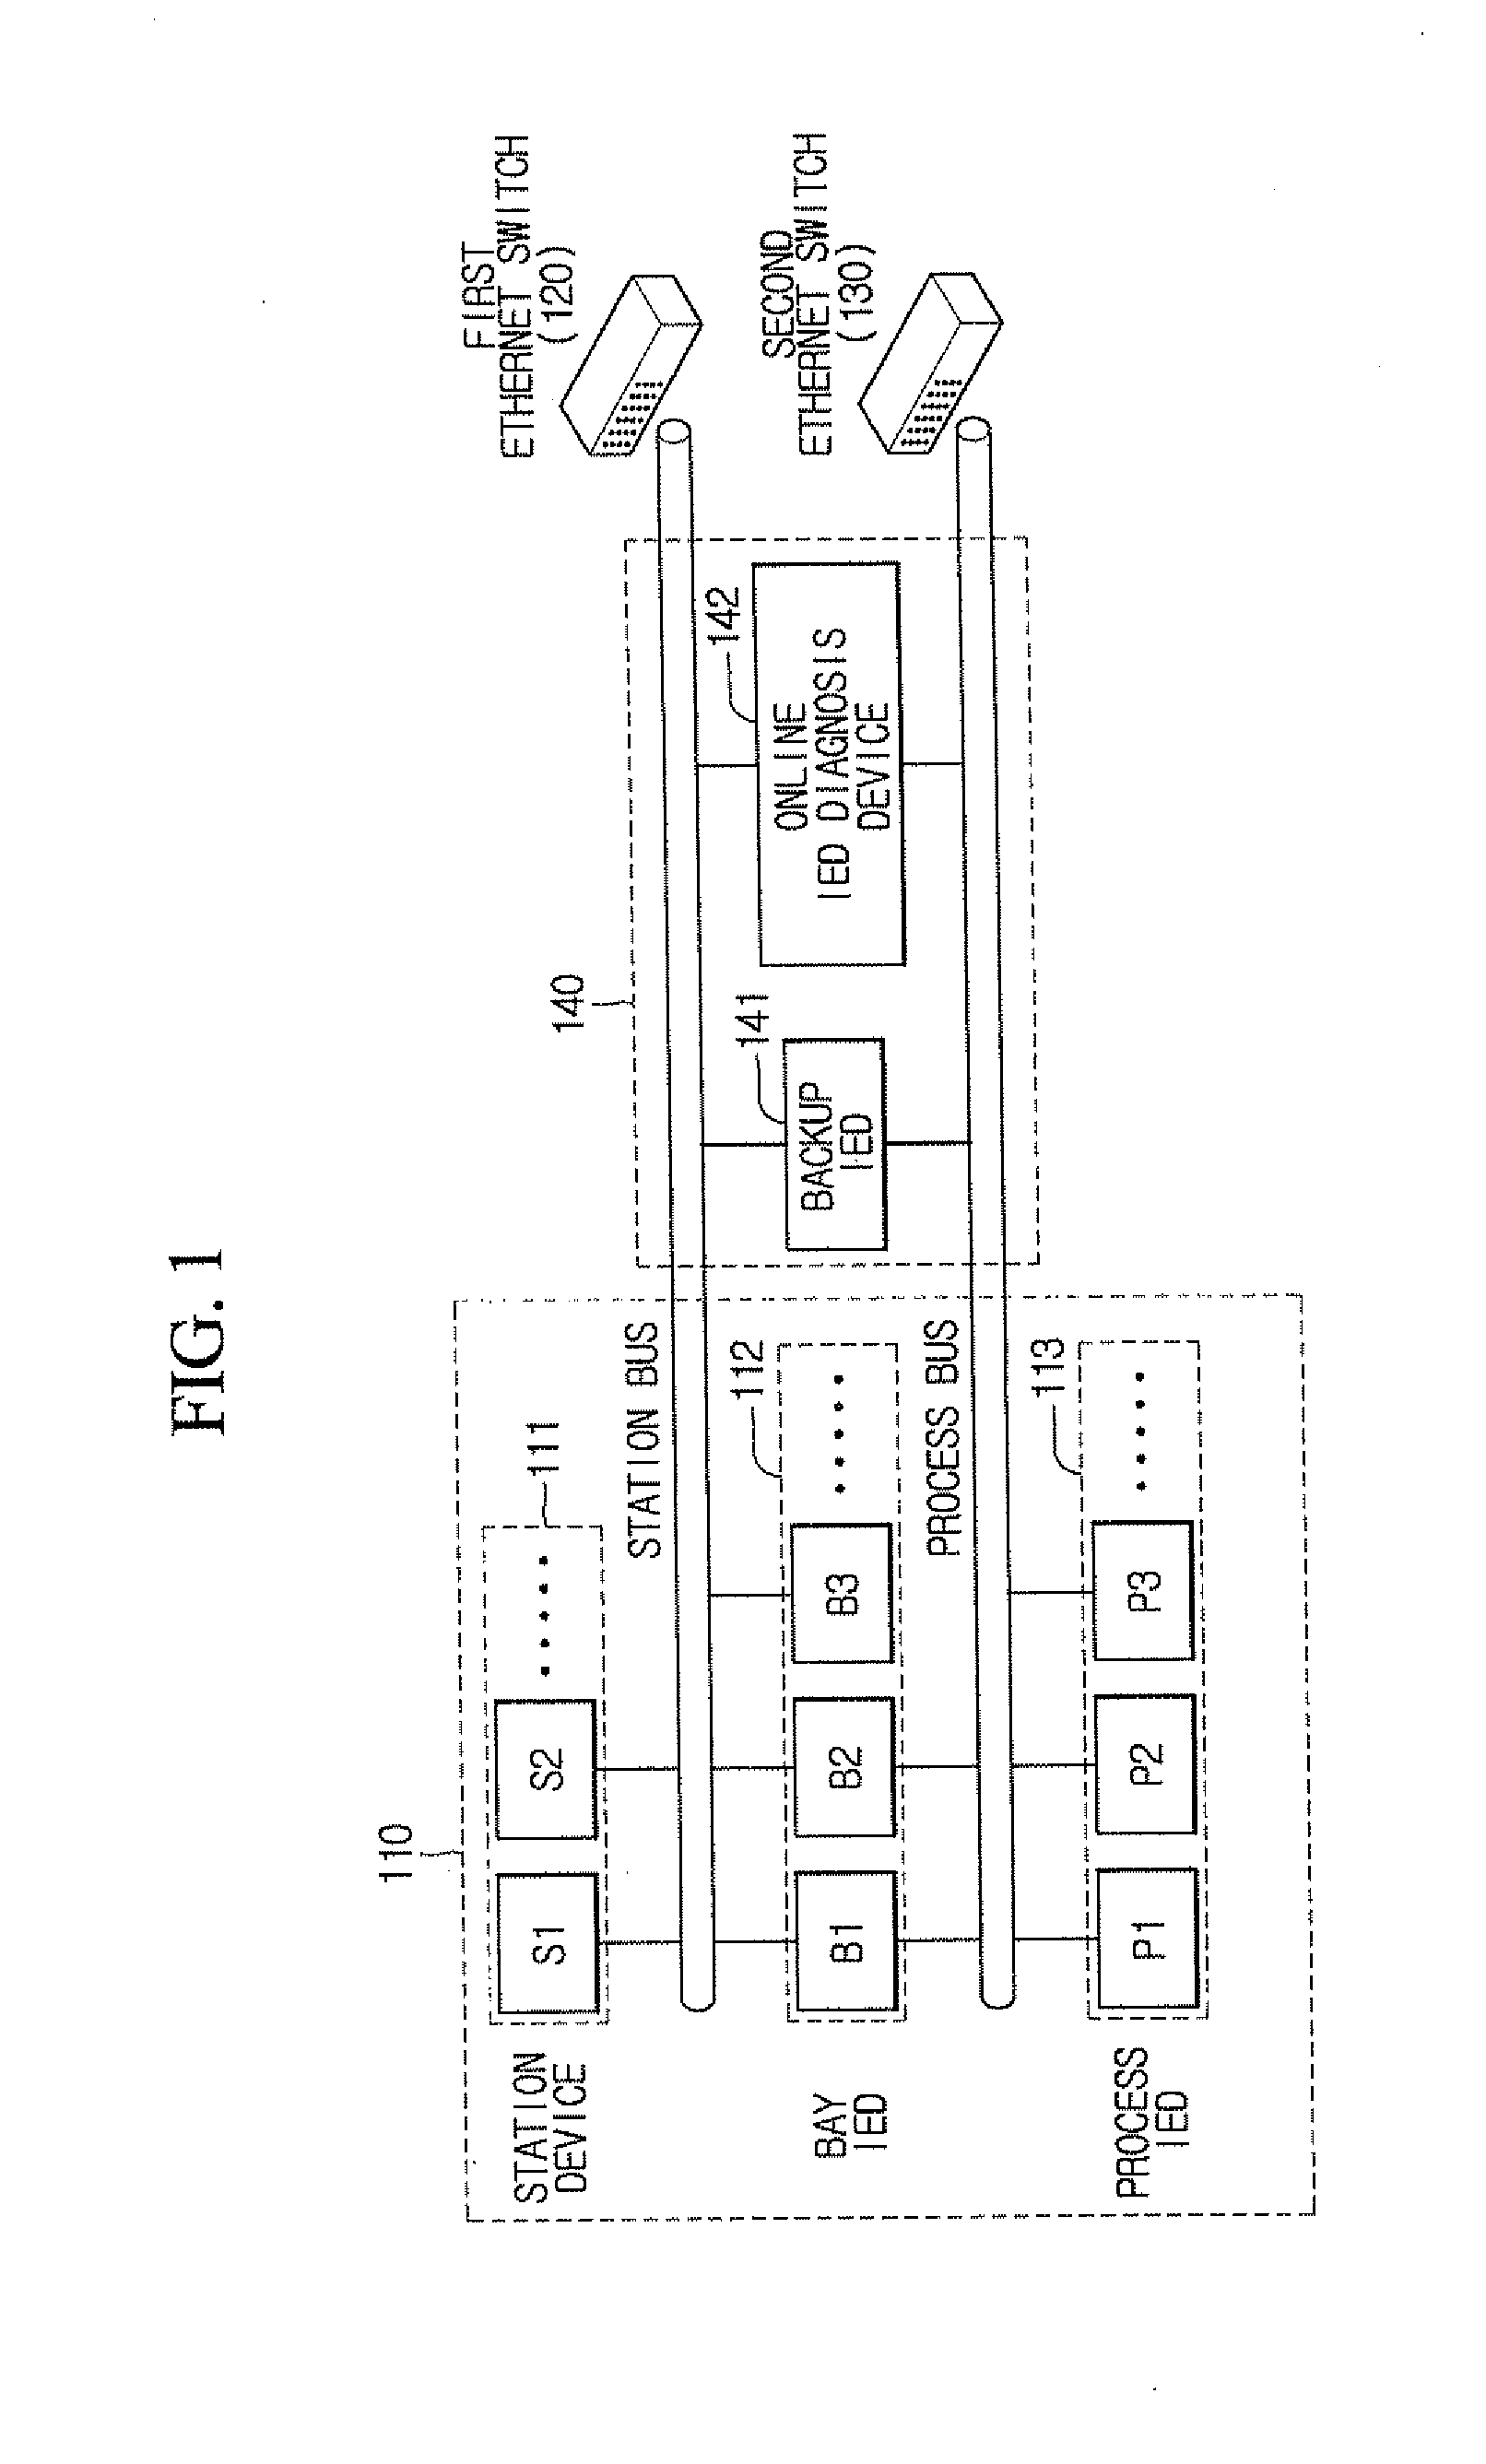 Online IED Fault Diagnosis Device and Method for Substation Automation System Based on IEC61850